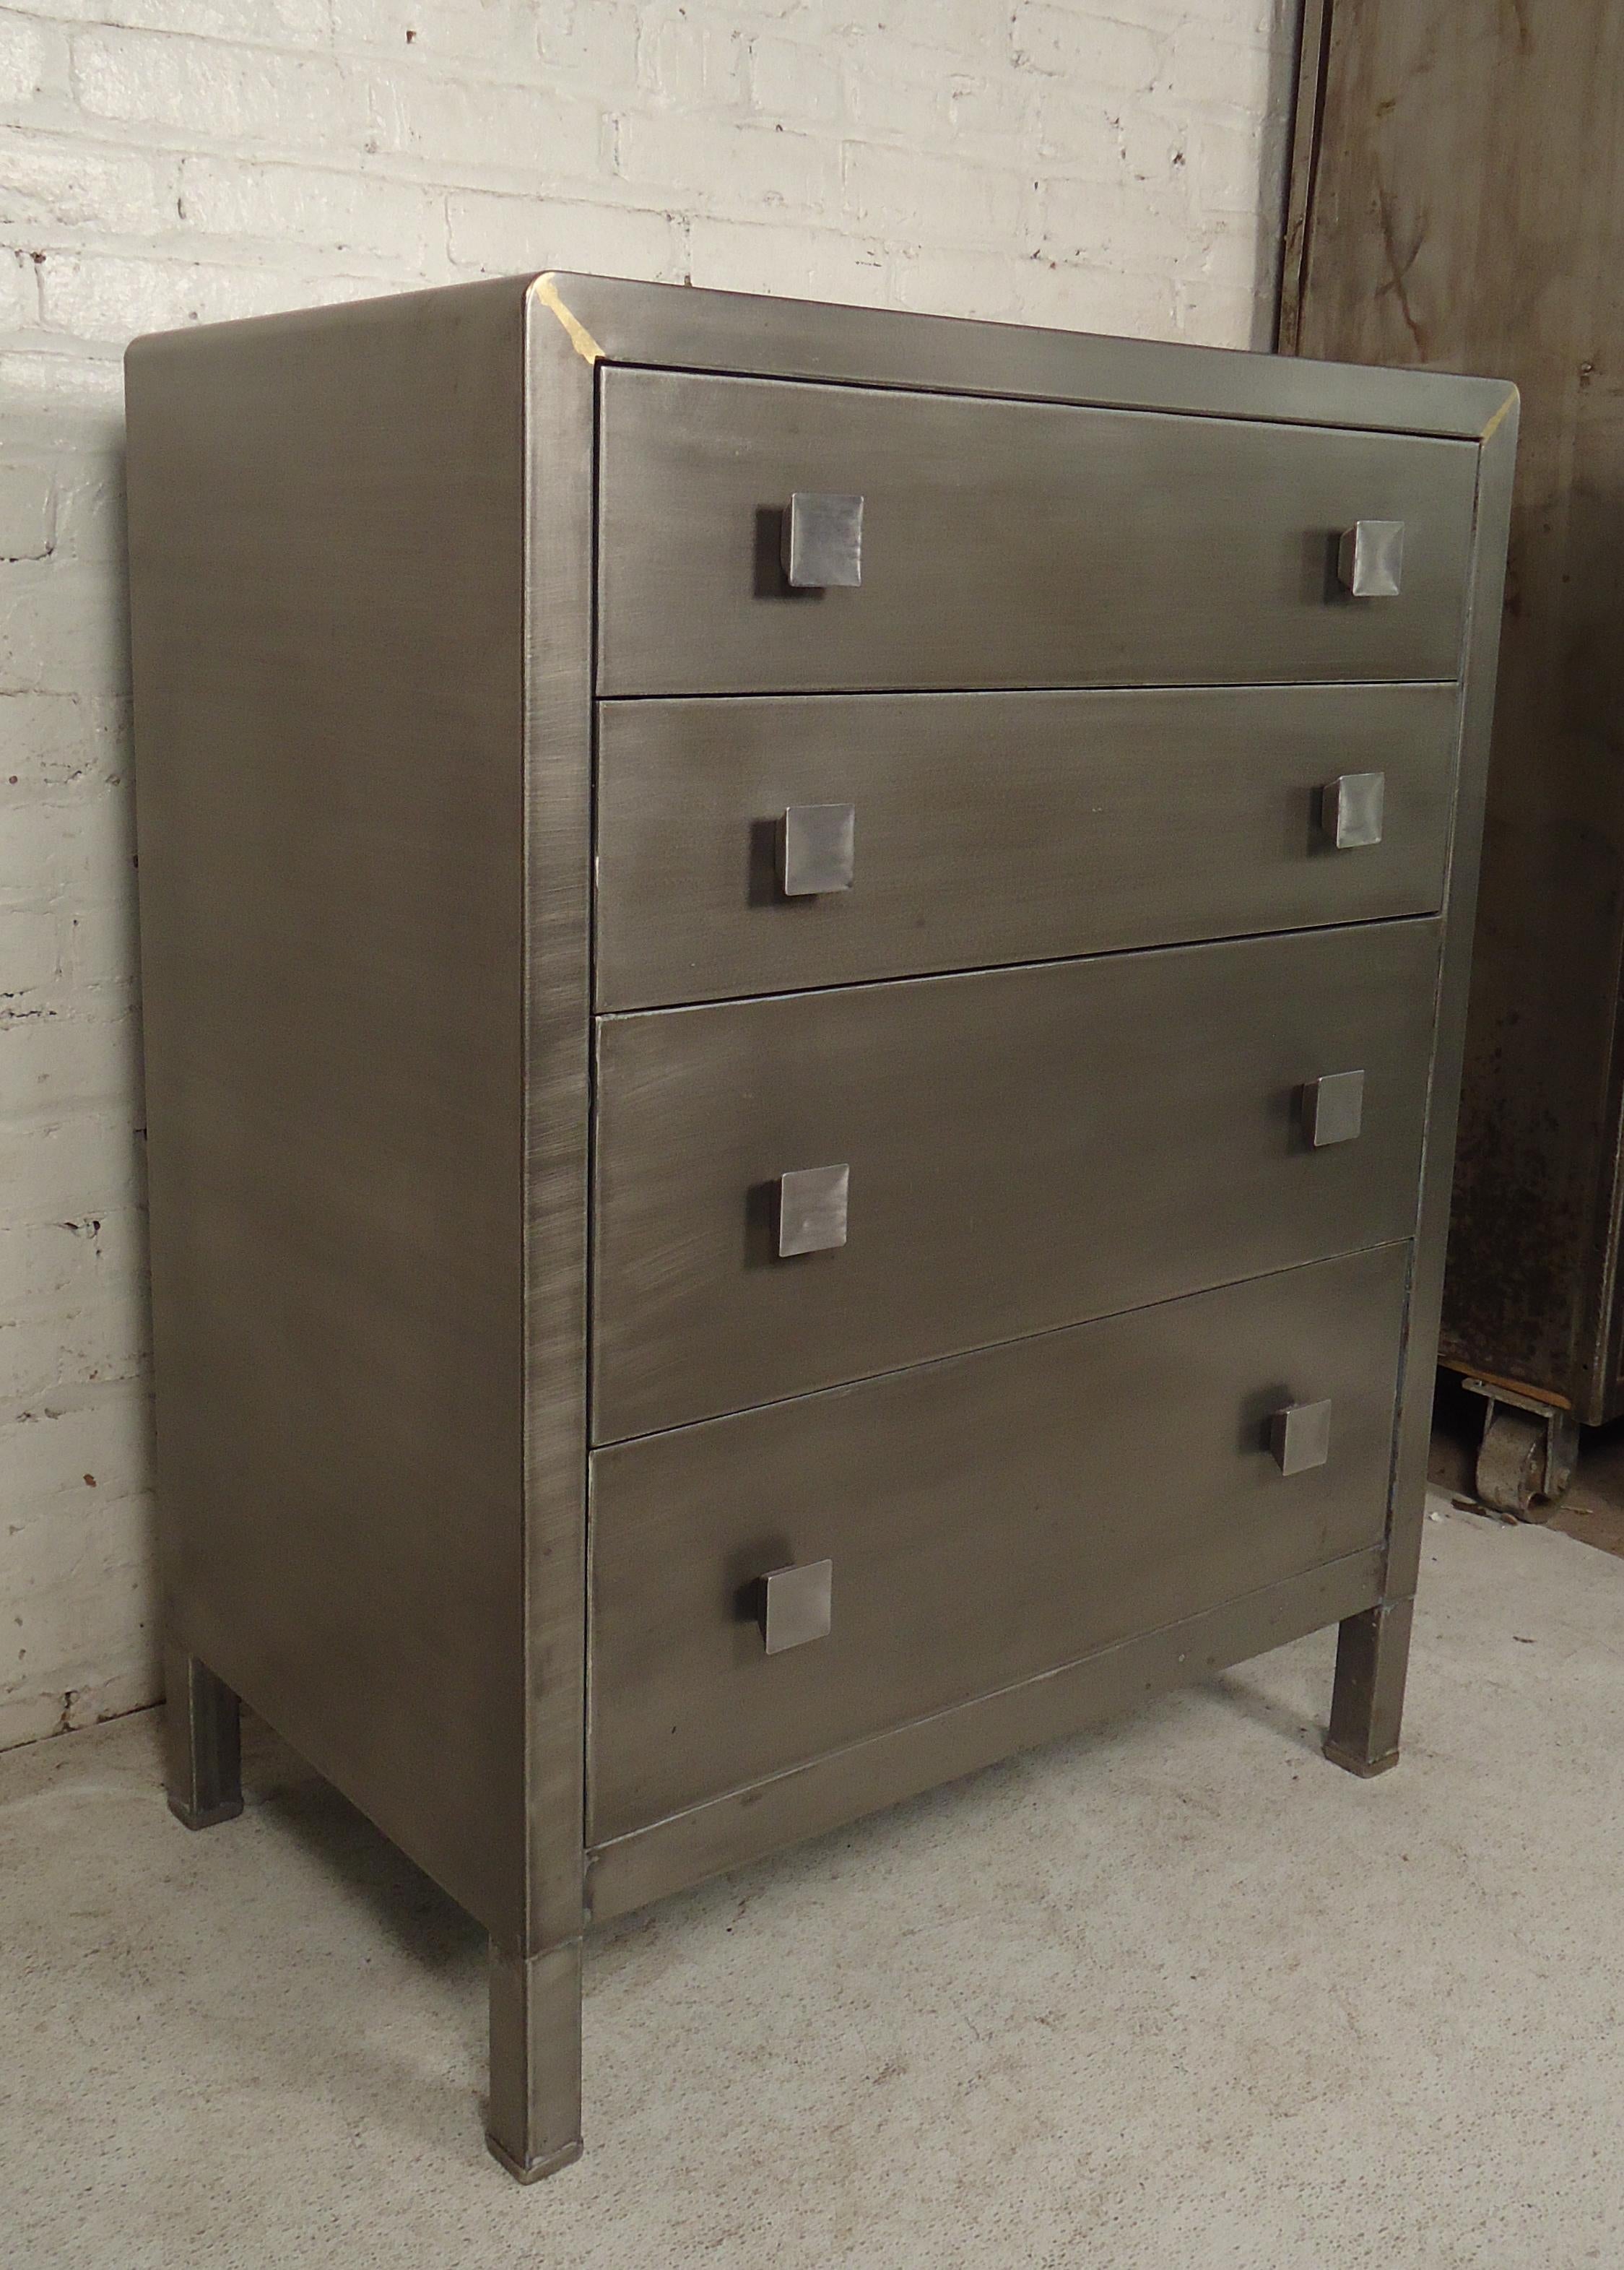 Tall dresser refinished in a bare metal style.

(Please confirm item location - NY or NJ - with dealer).
   